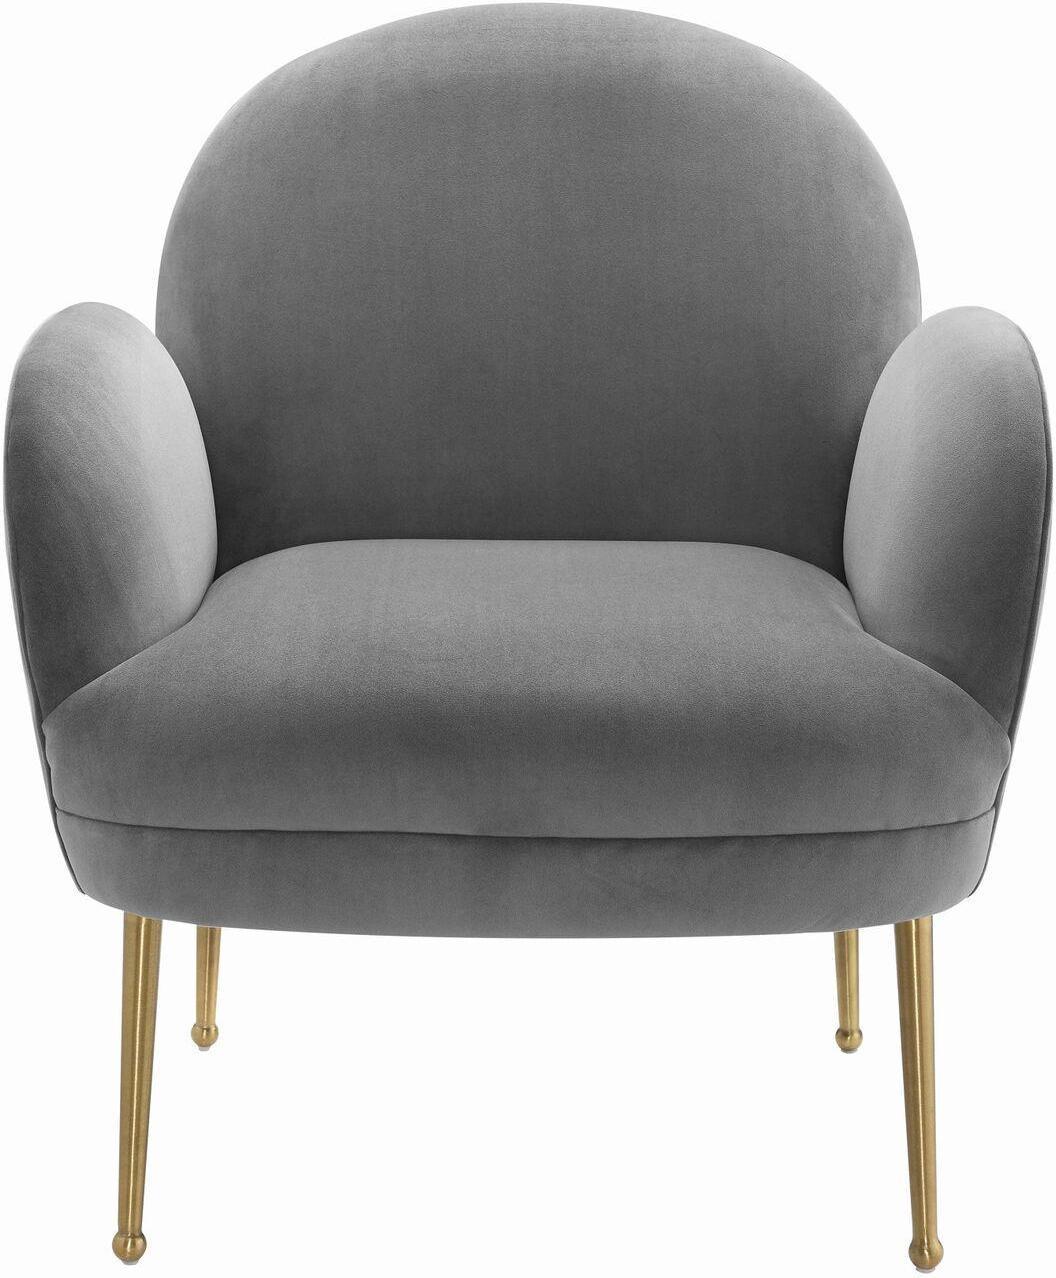 mid century modern living room furniture Tov Furniture Accent Chairs Grey